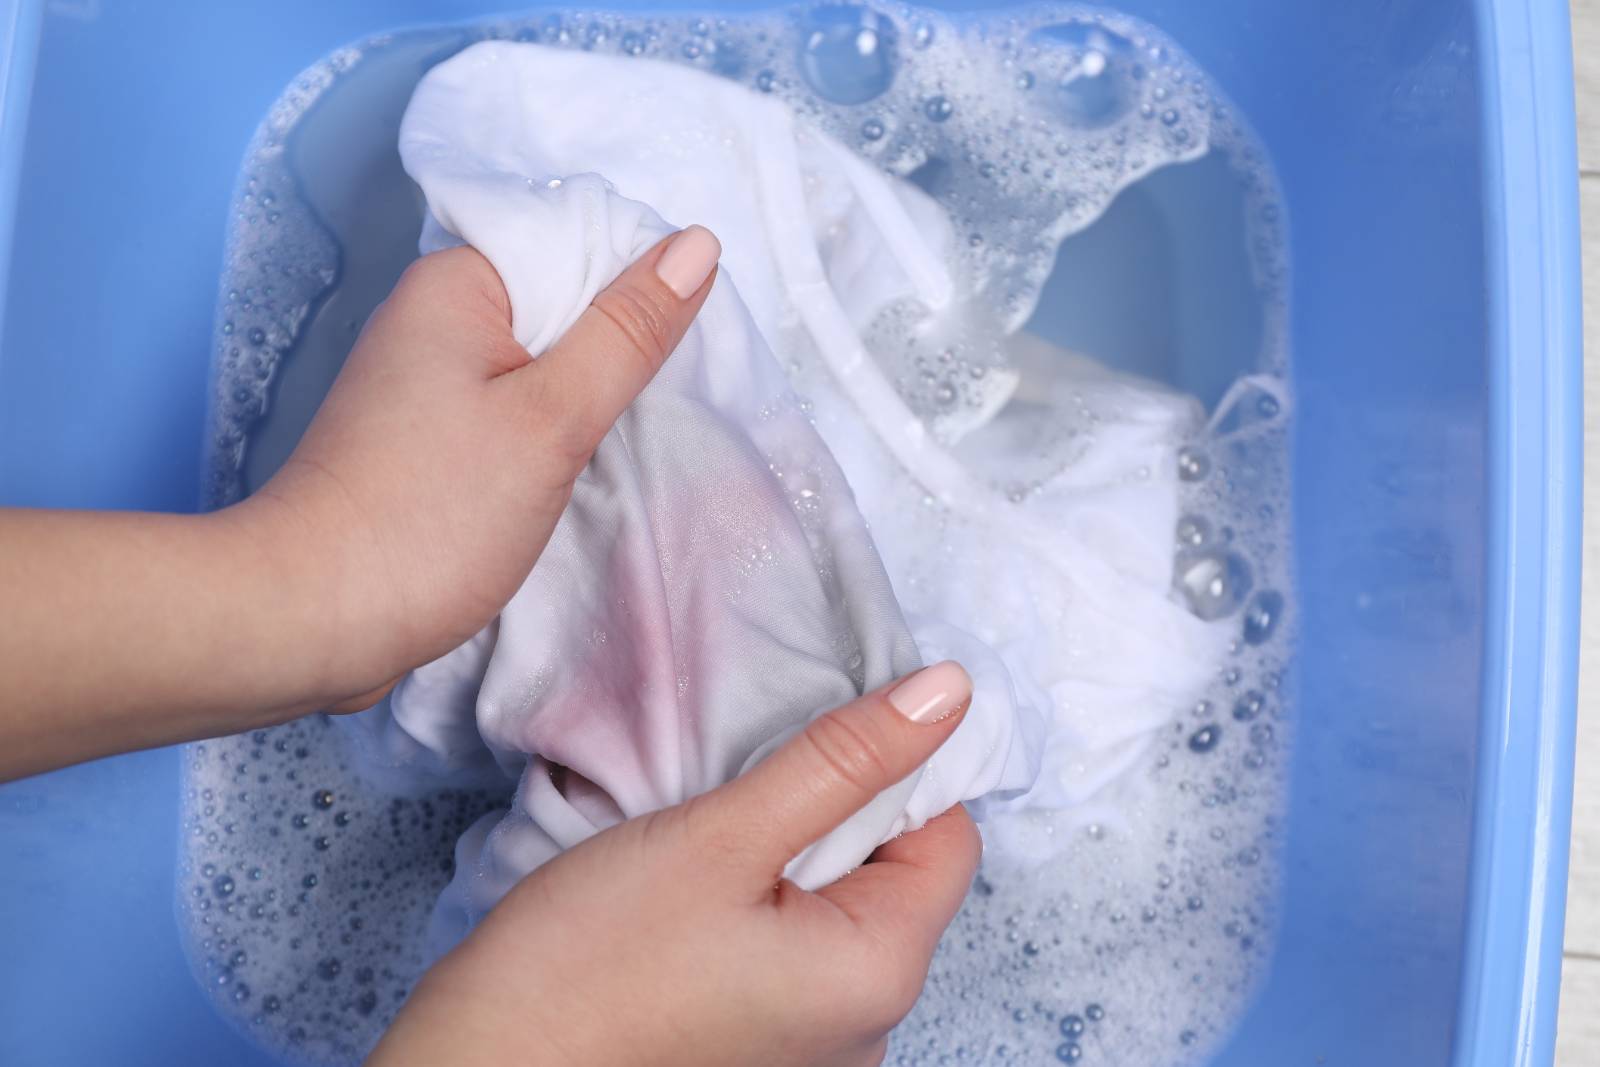 Woman using liquid stain remover on shirt in a bowl of soapy water